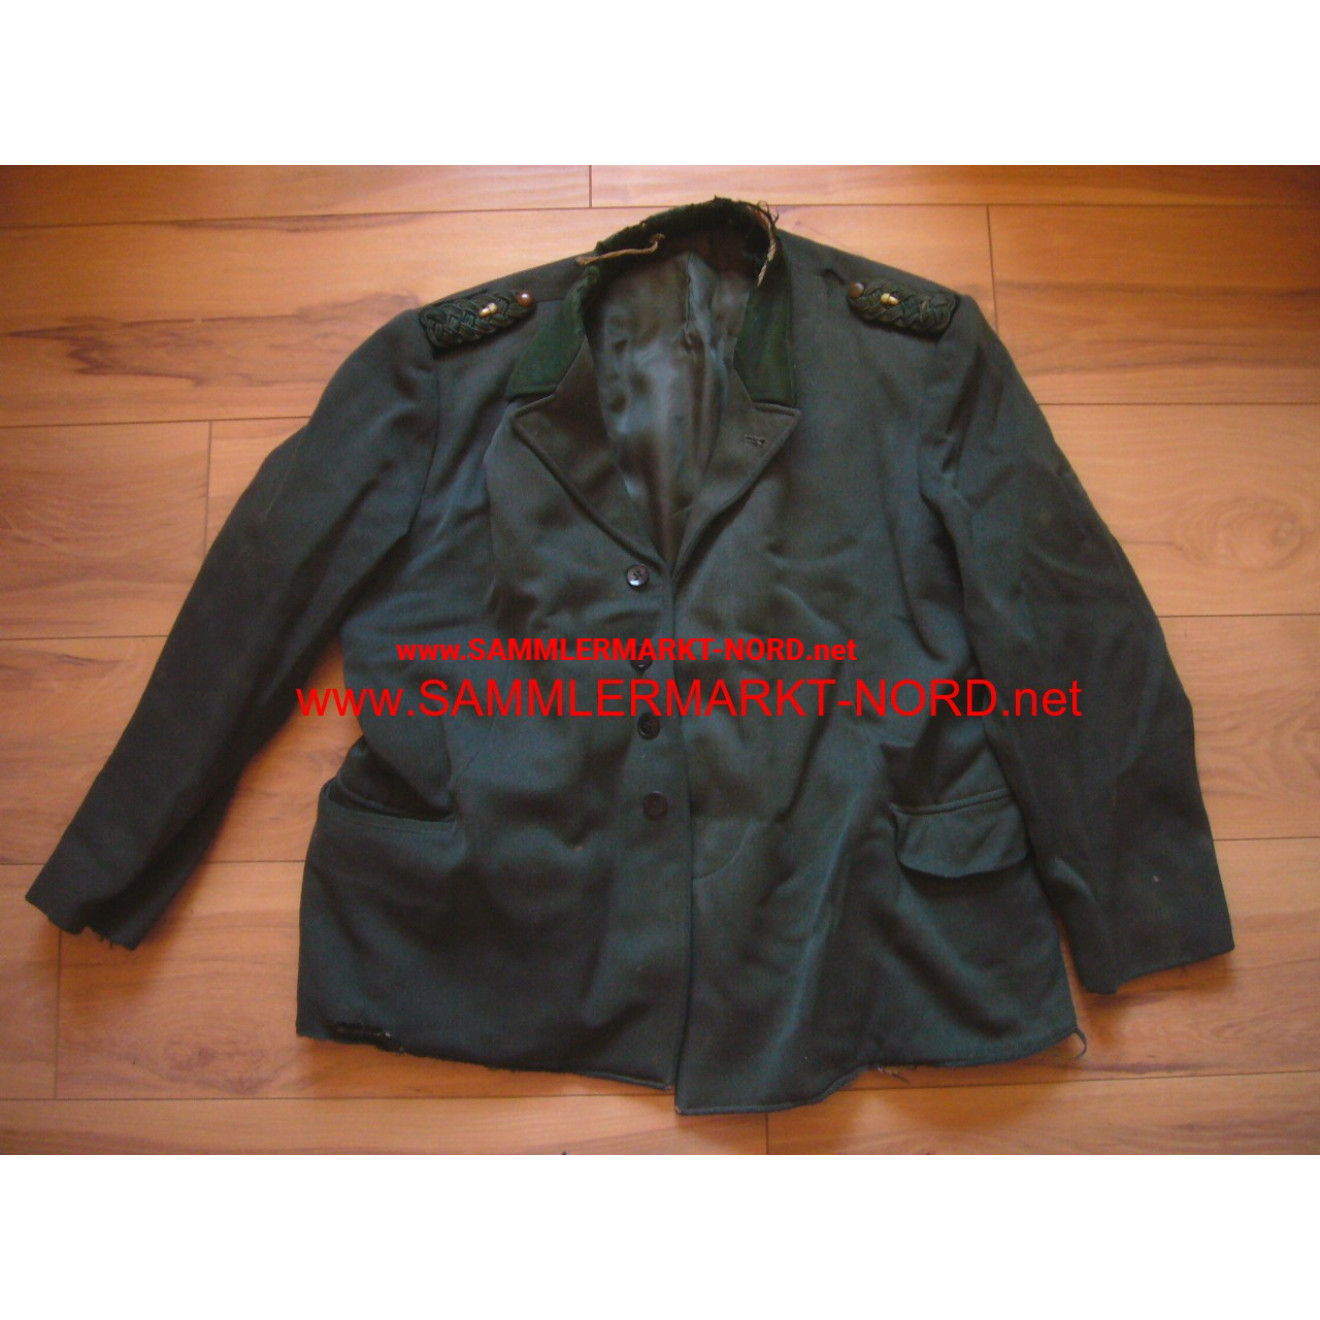 Forest Service - Uniform jacket of a forest inspector